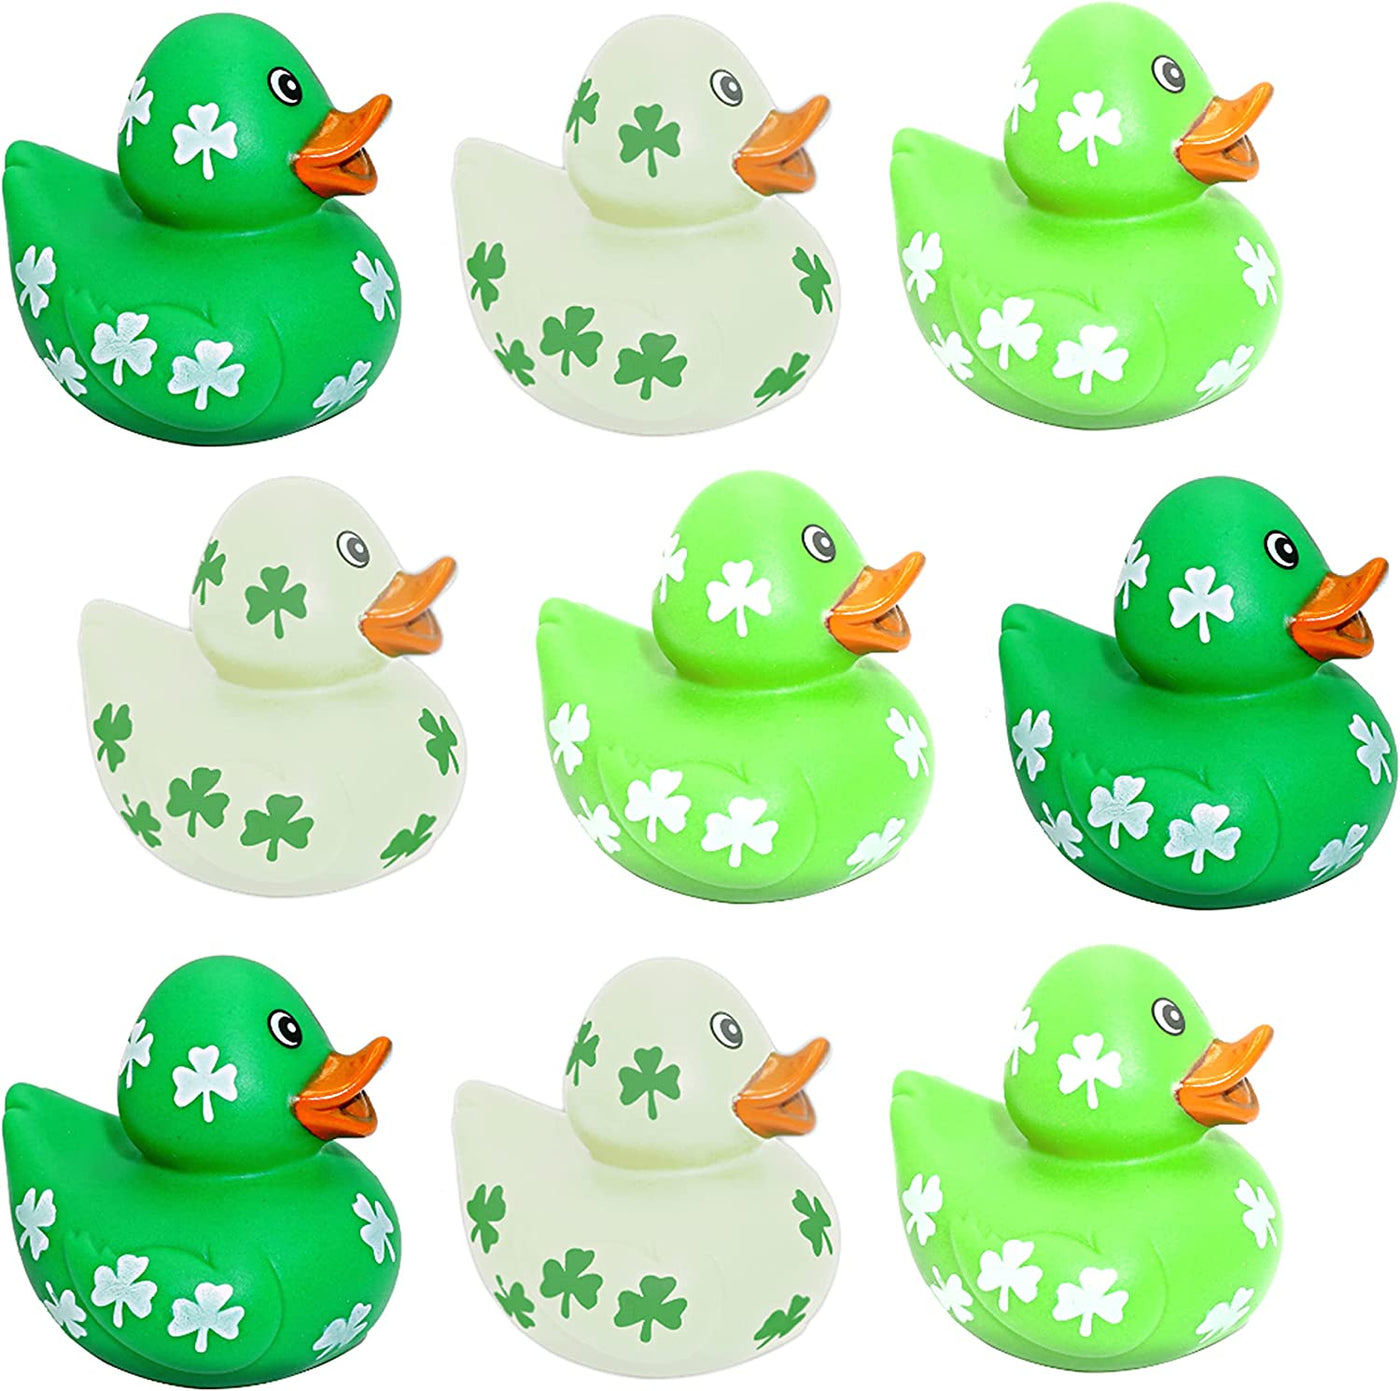 4E's Novelty 24 Pcs St Patricks Day Rubber Ducks - 2 inch Shamrock Rubber Duckies Bulk - St. Patrick's Day Gifts for Kids Party Favors Accessories